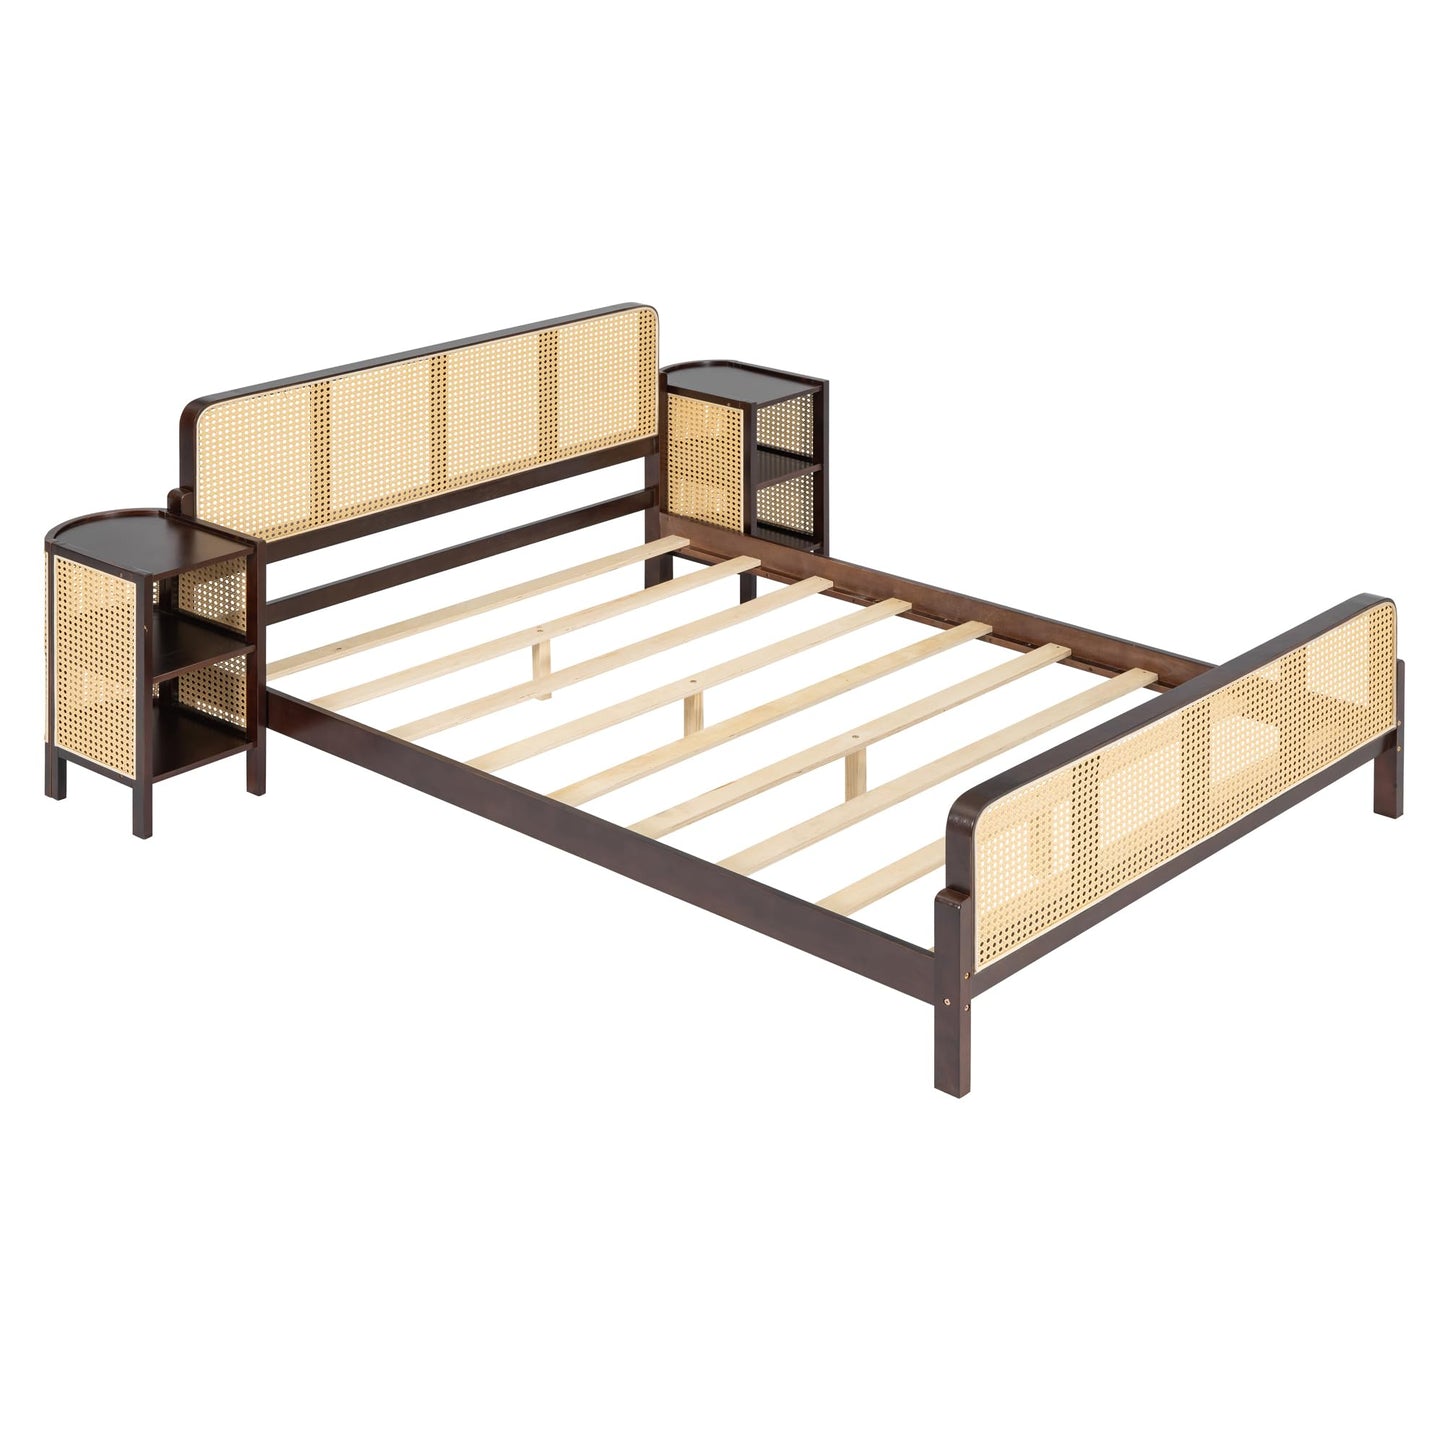 SOFTSEA Rattan Bed Frame with 2 Nightstands 3 Piece Bedroom Furniture Set, Farmhouse Style